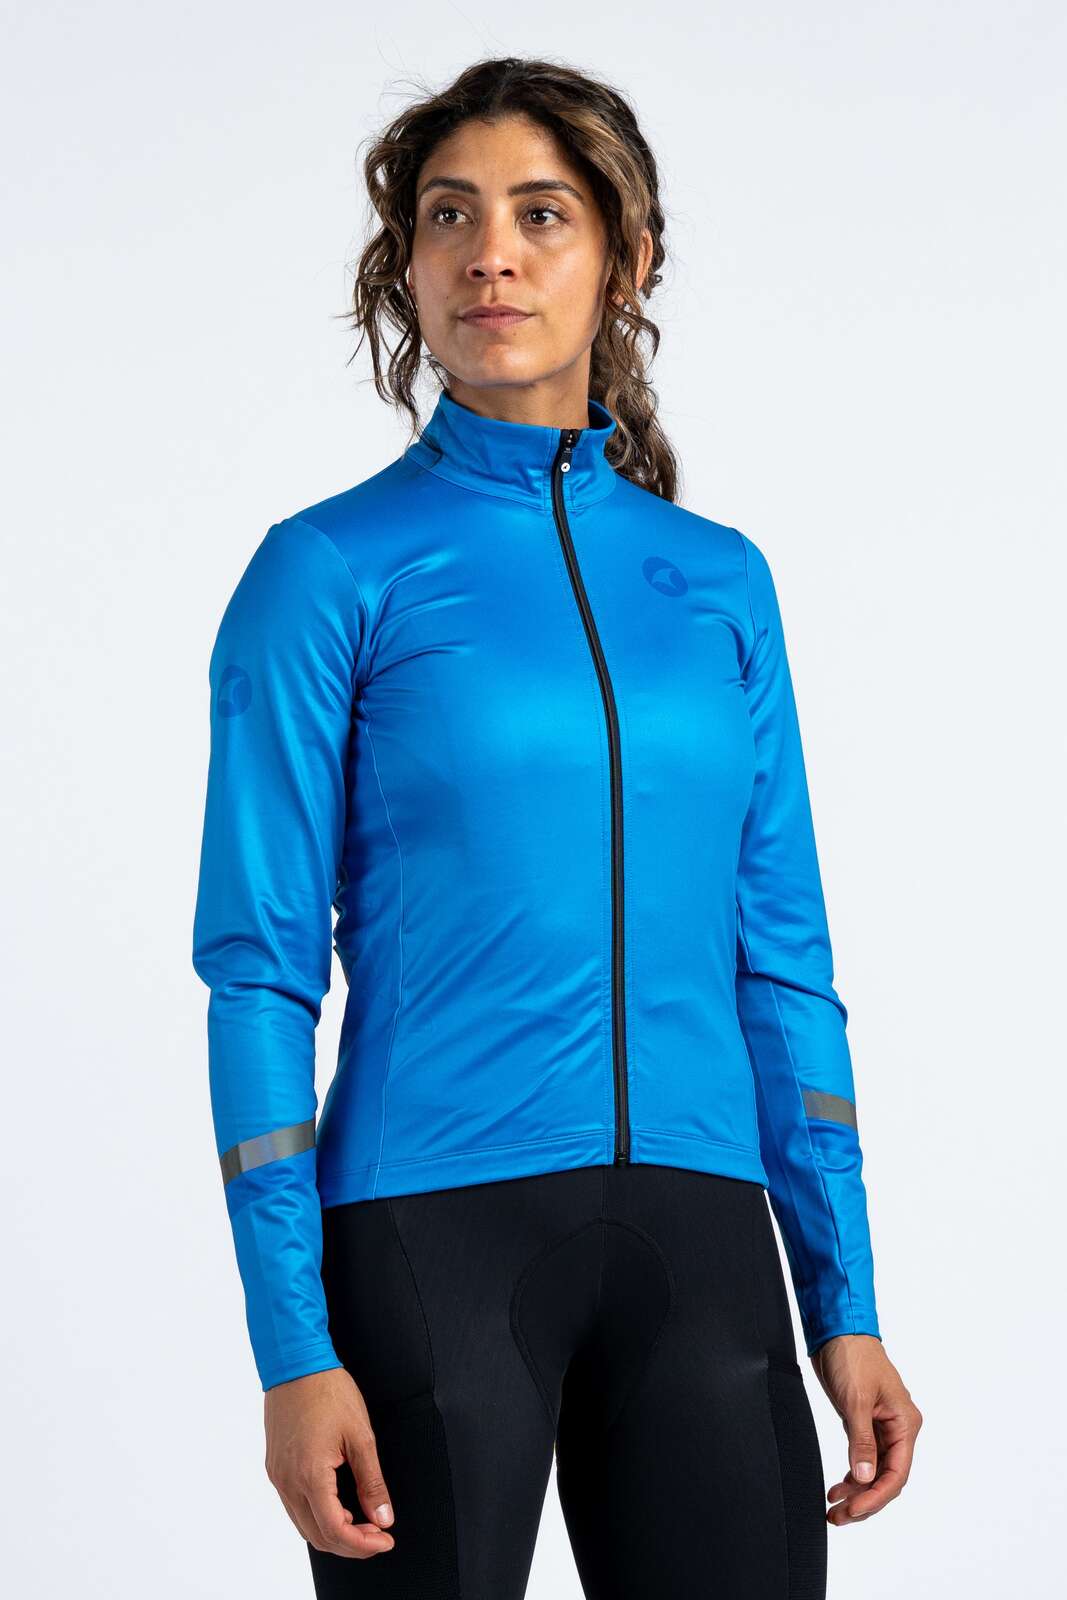 Women's Blue Thermal Cycling Jersey - Front View